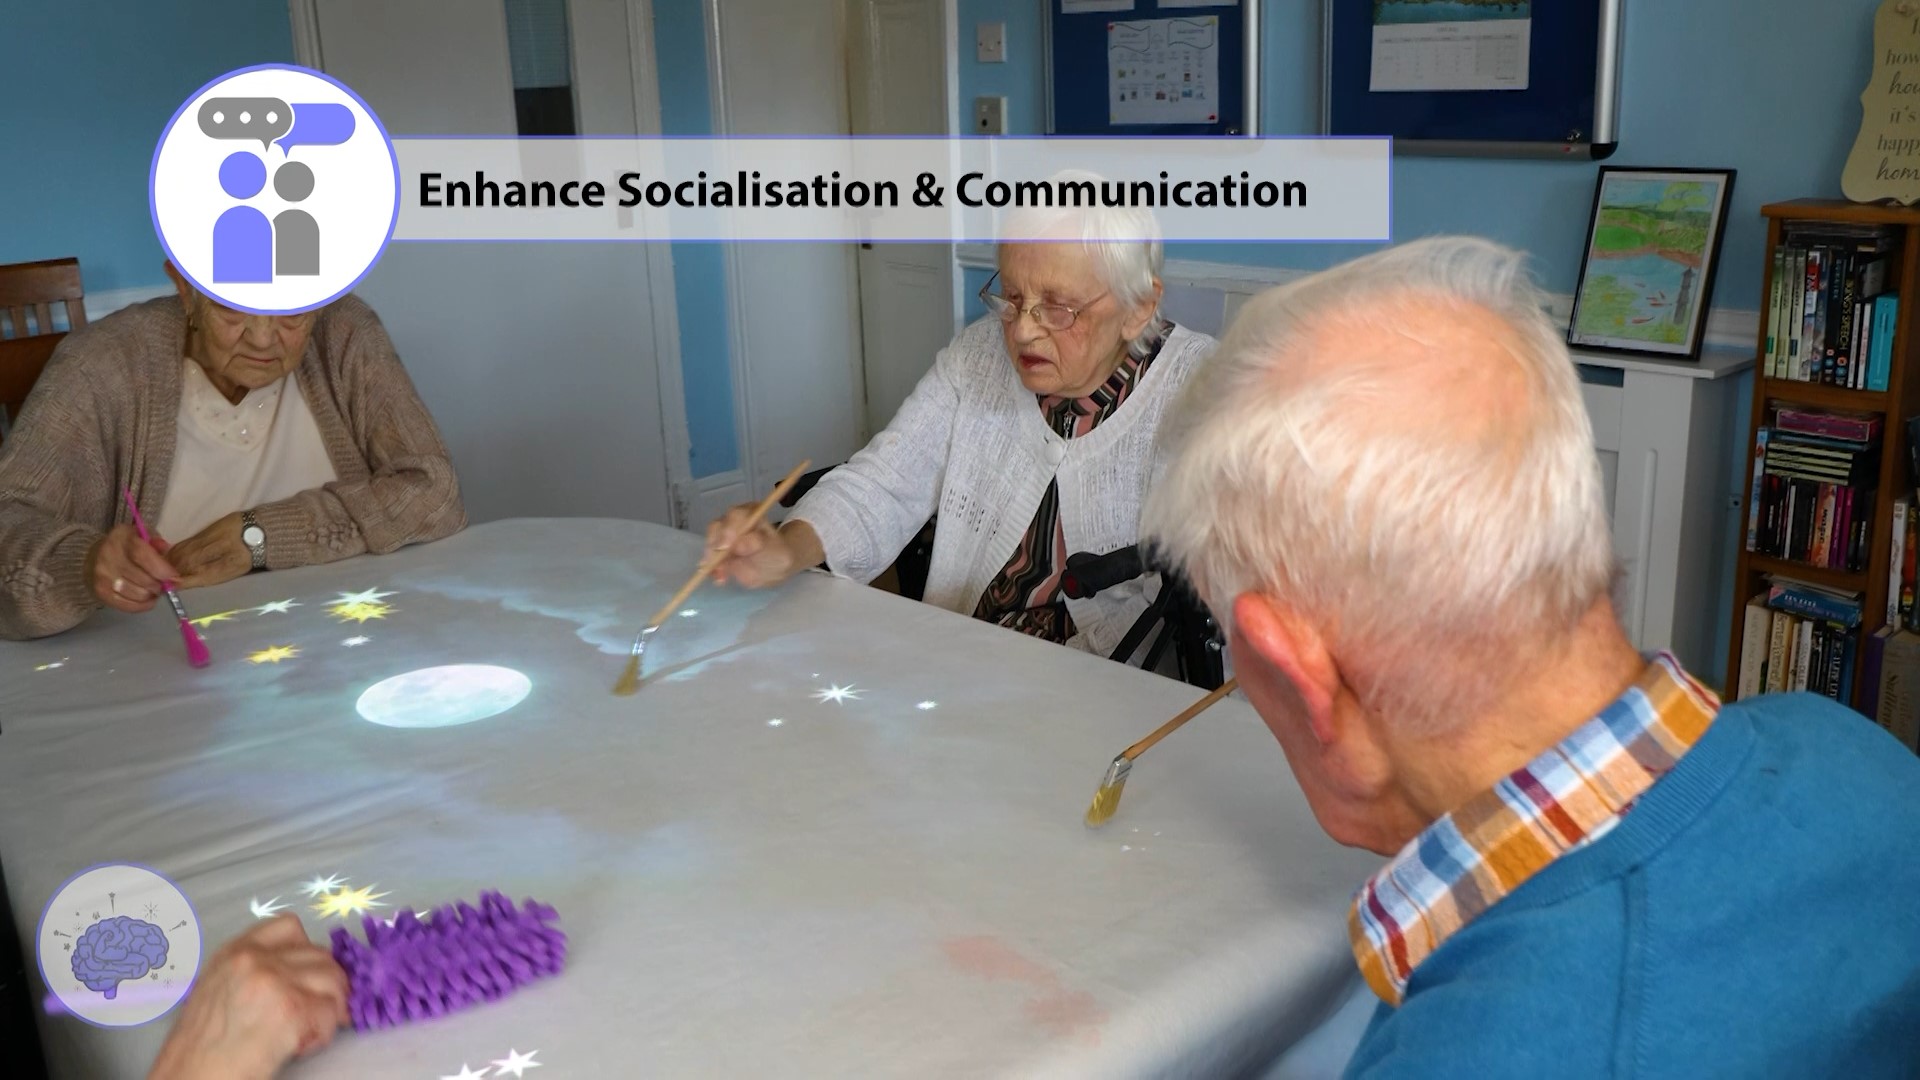 Care home residents taking part in a group activity and discussing the calming stars that appear whilst using the Wellbeing suite interactive projector on a table with the included long reach paintbrush accessory